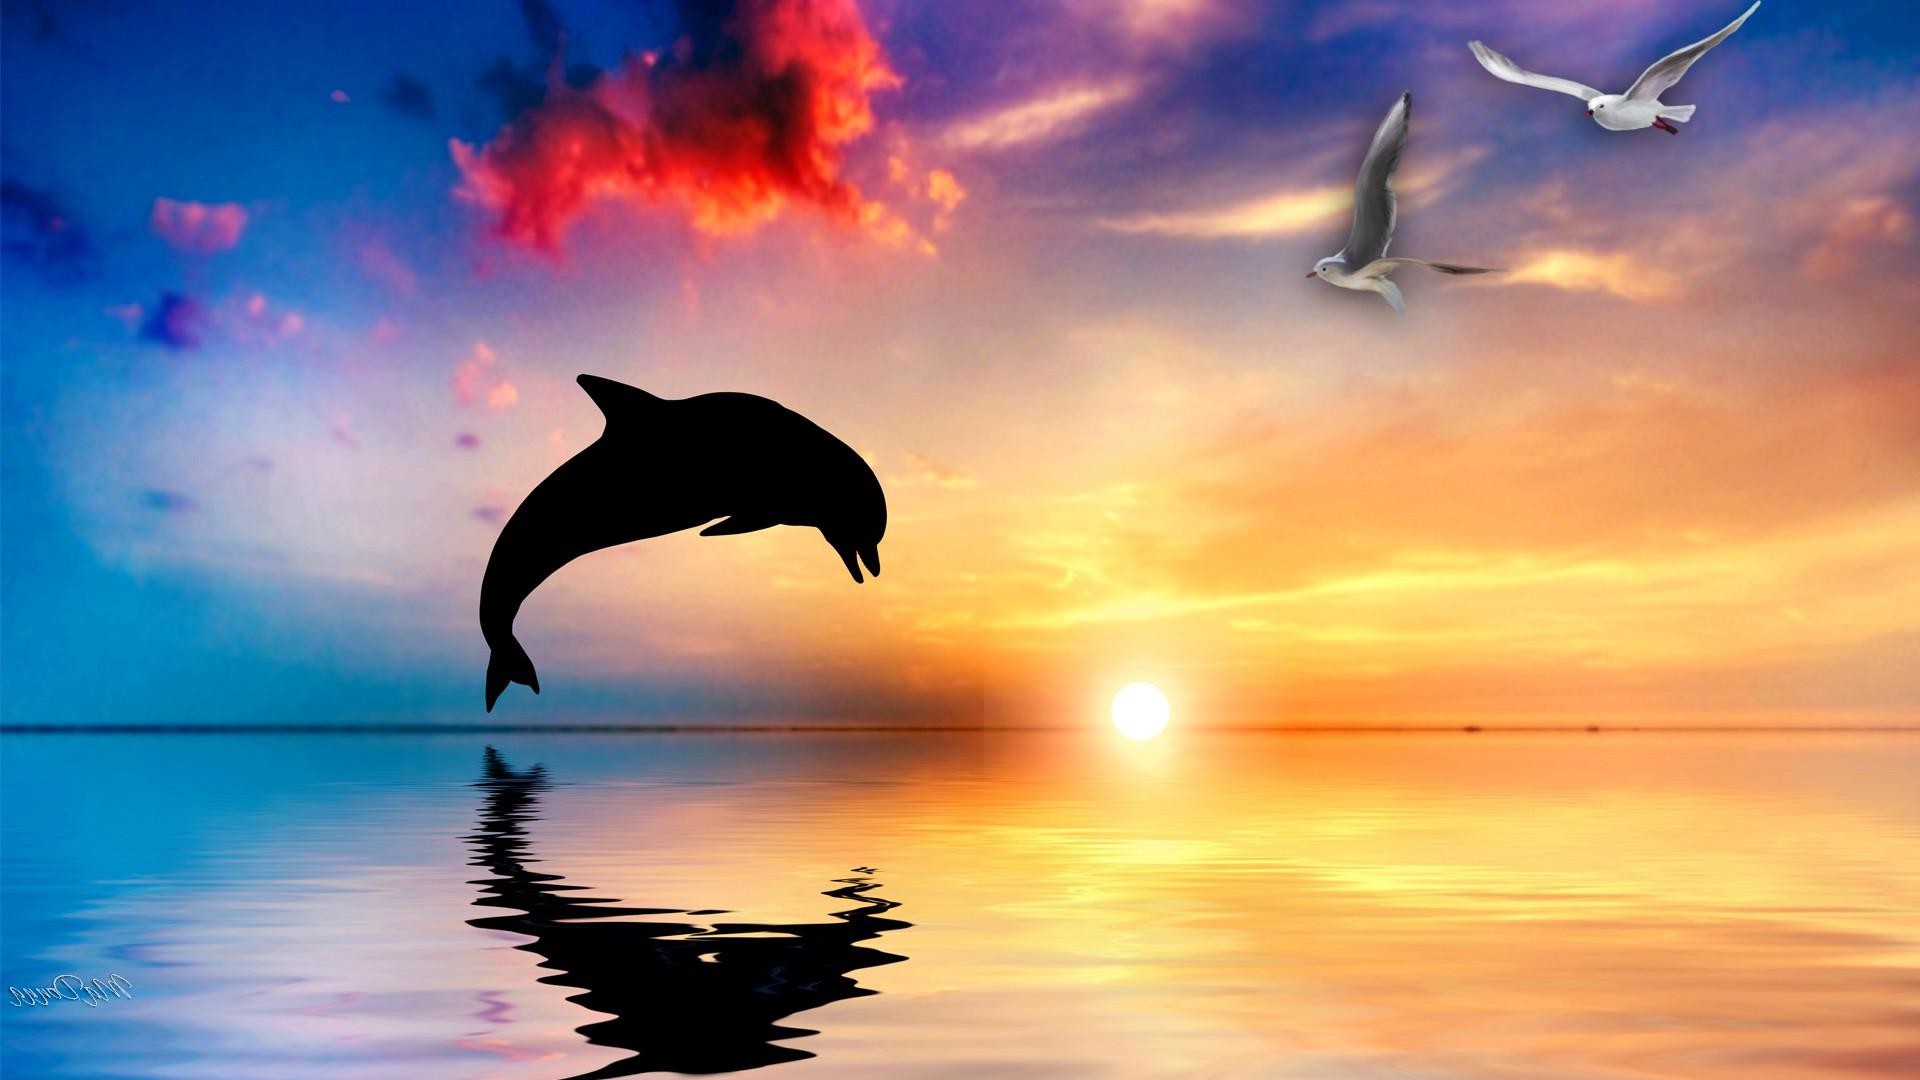 1920x1080 Dolphin HD Wallpapers and Backgrounds | HD Wallpapers | Pinterest |  Wallpaper, Hd wallpaper and Wallpaper backgrounds